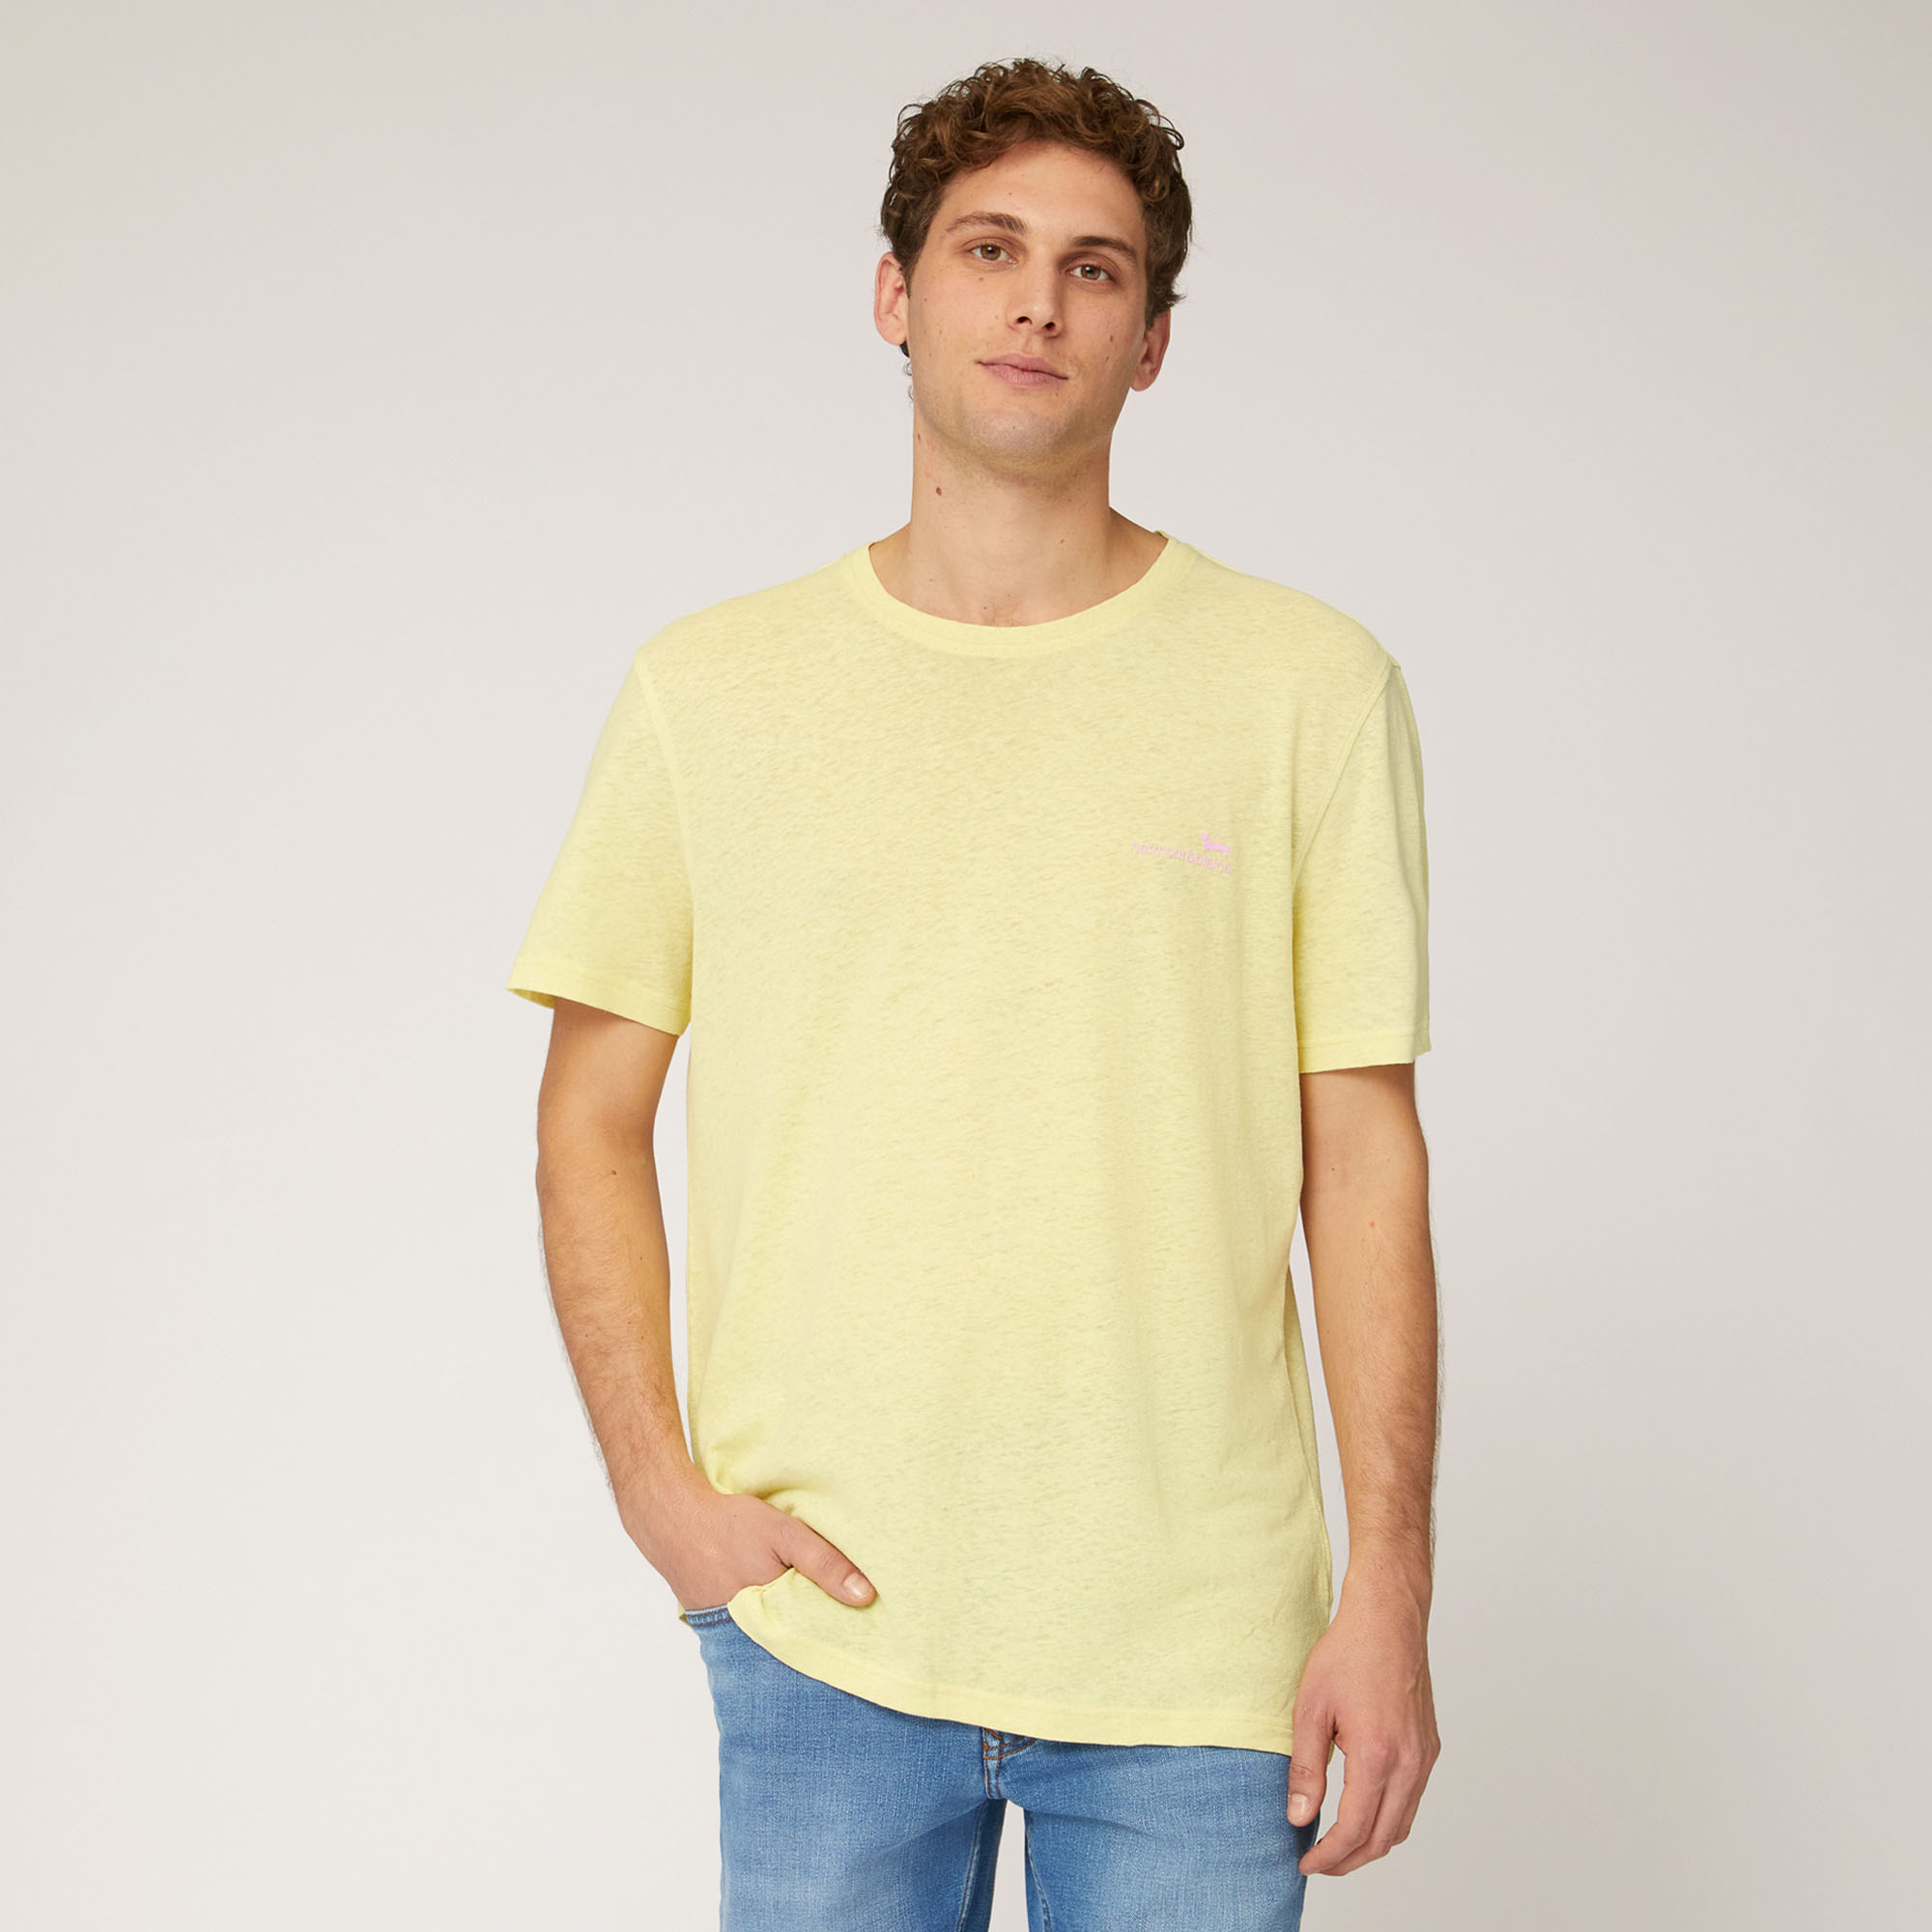 Linen and Cotton T-Shirt, Light Yellow, large